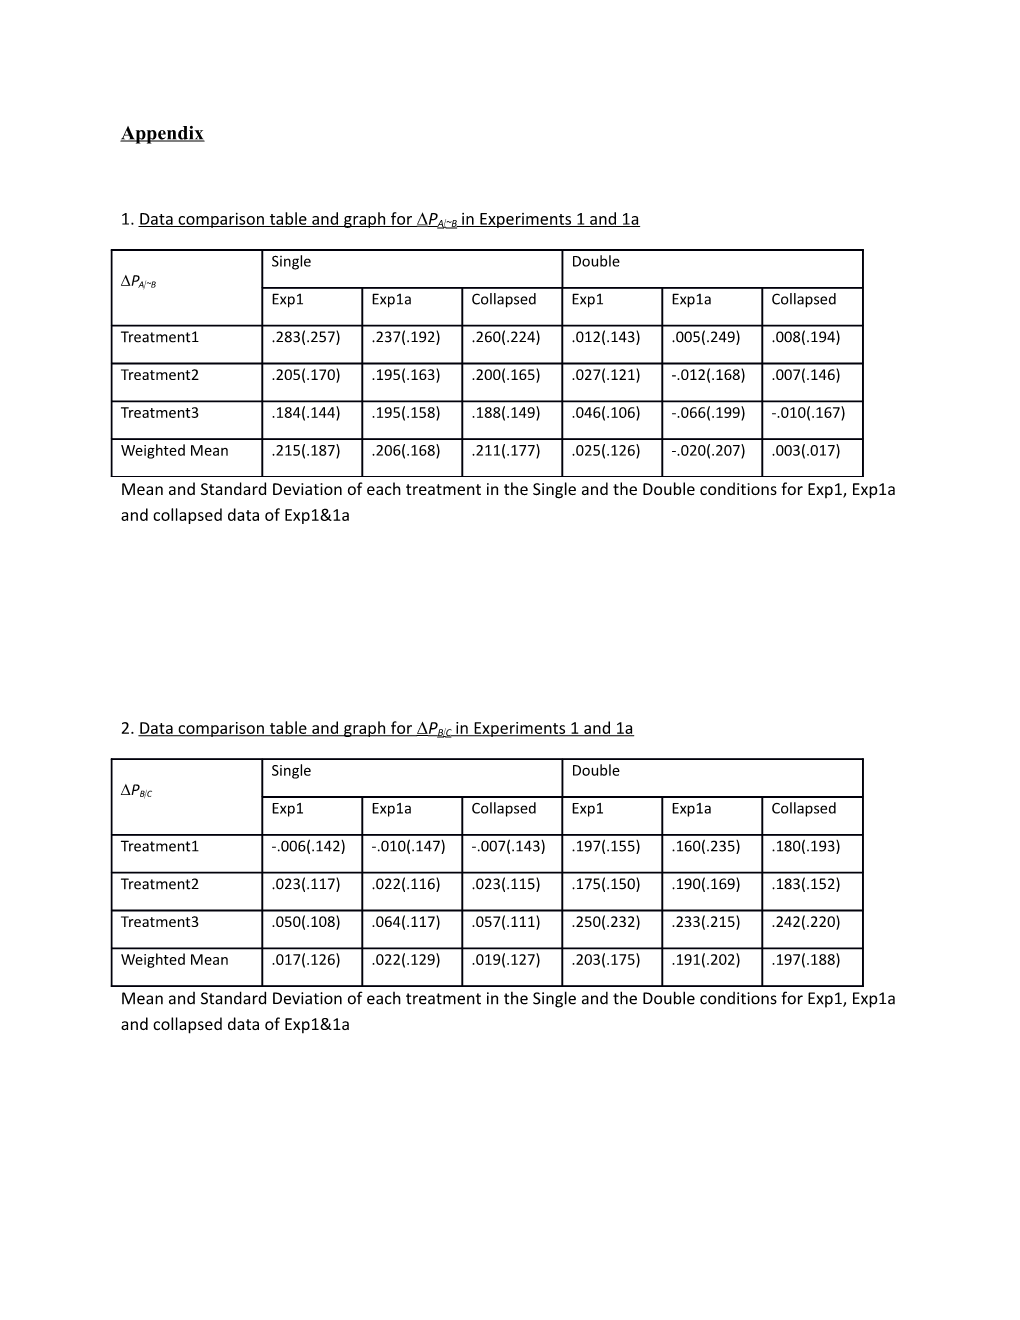 1. Data Comparison Table and Graph for DPA B in Experiments 1 and 1A